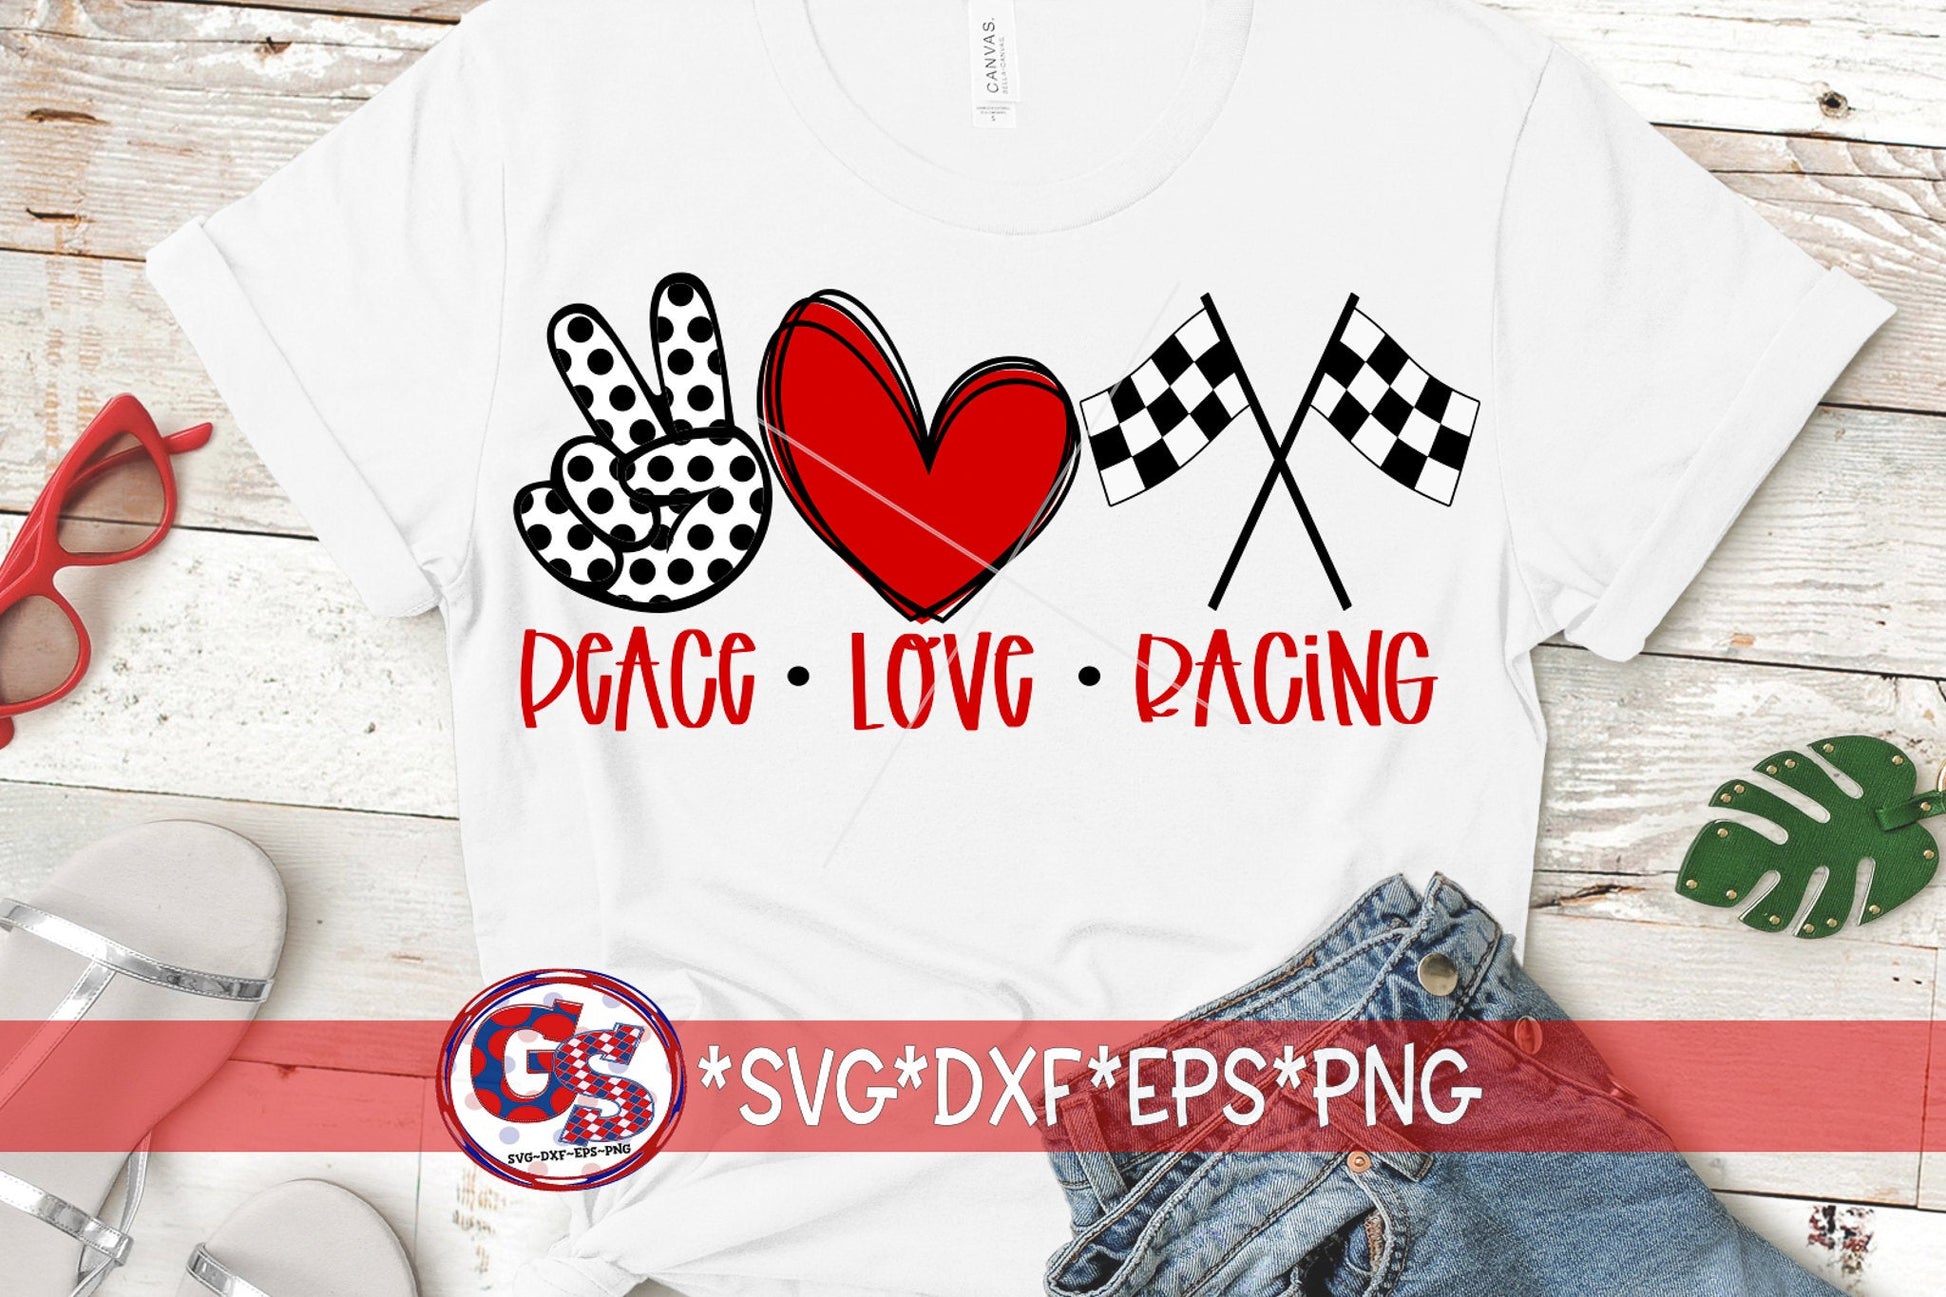 Peace Love Racing svg | Drag Racing svg, eps, dxf png. Drag Strip DxF | Racing SvG | Dirt Track Racing SvG | Instant Download Cut Files